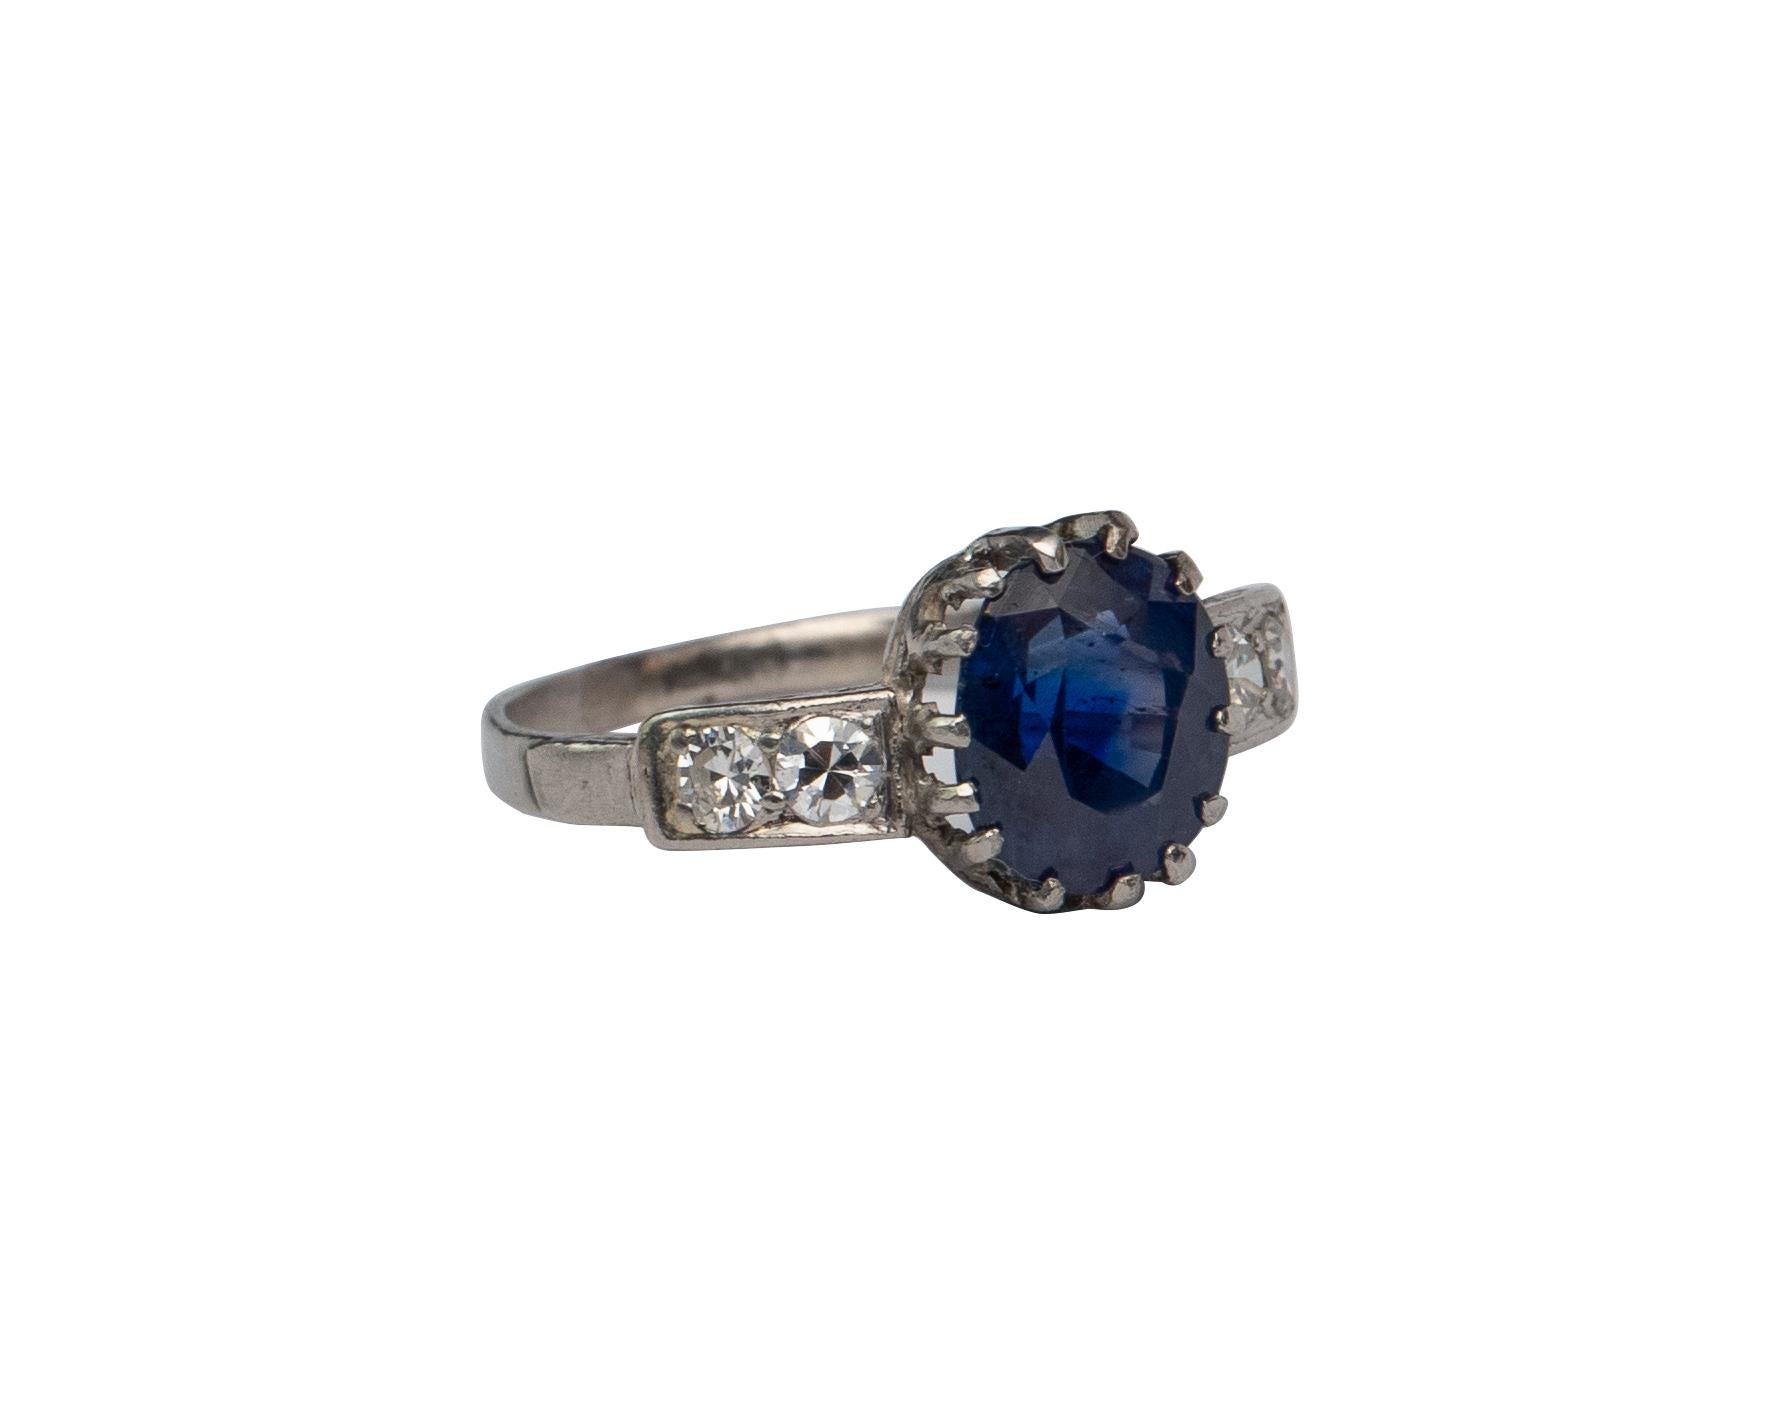 This is an gorgeous example of a late Victorian era sapphire ring! The stunning 2.66 carat deep royal blue sapphire sits proudly in a crown of fancy prongs! The ring is crafted in platinum and accents the impressive center with two simple rose cut